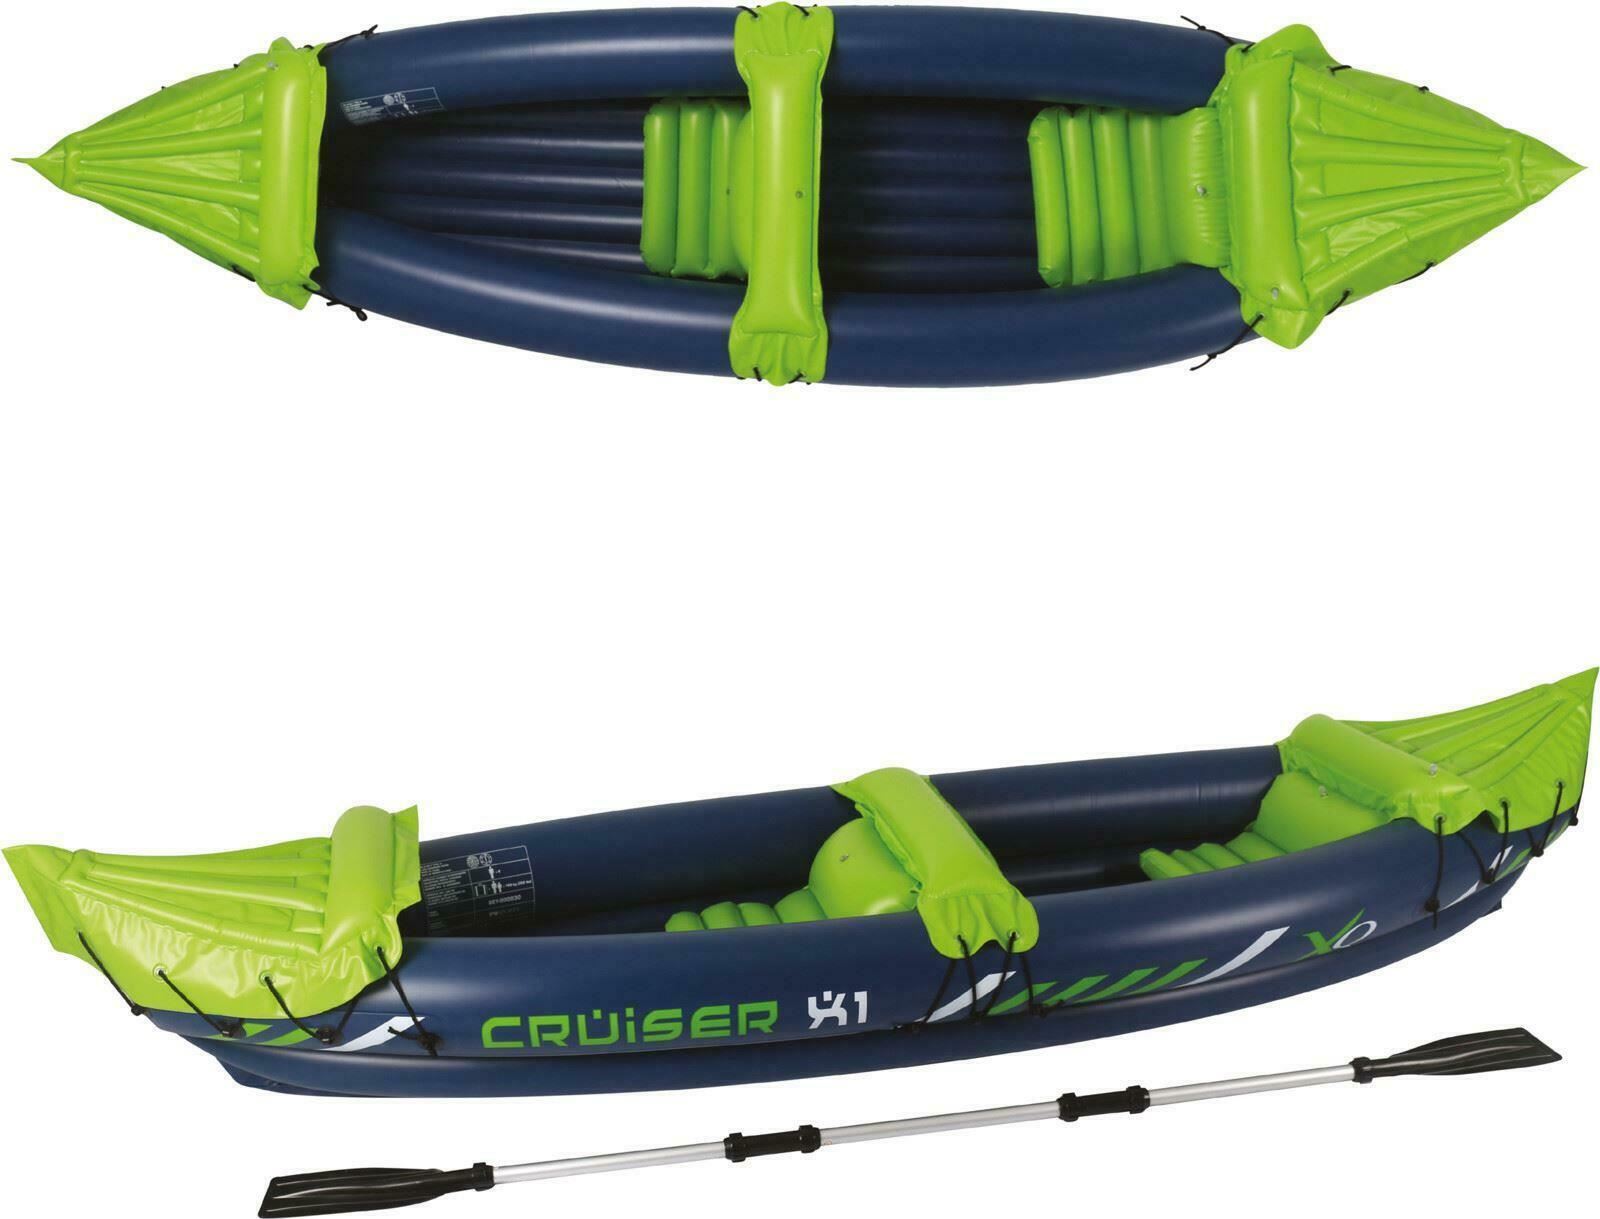 gHOST-7 Inflatable Canoe Kayak Dinghy Boat with Double Paddle 2 - Person by Geezy - The Magic Toy Shop